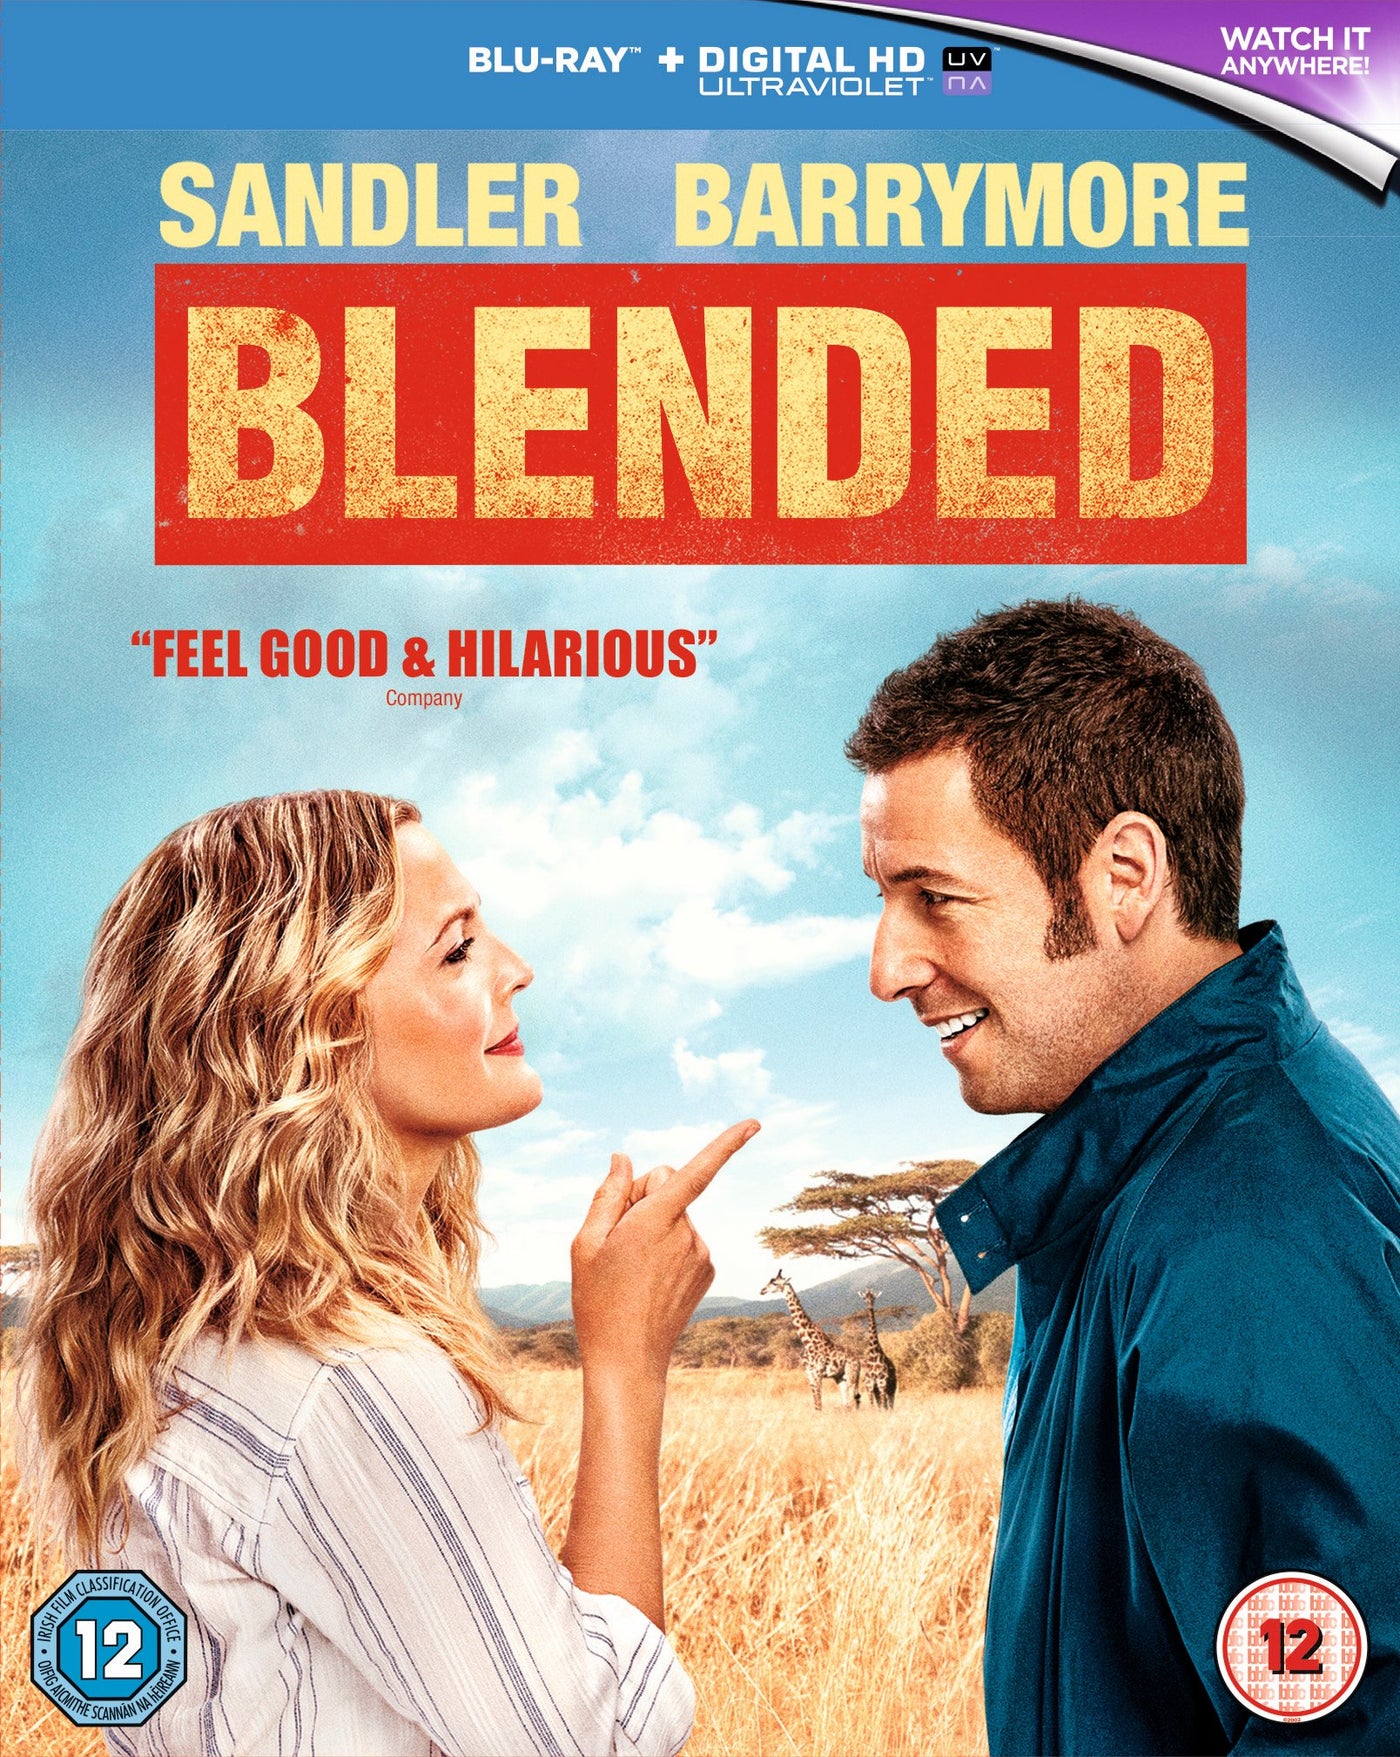 Blended[2014] (Blu-ray)